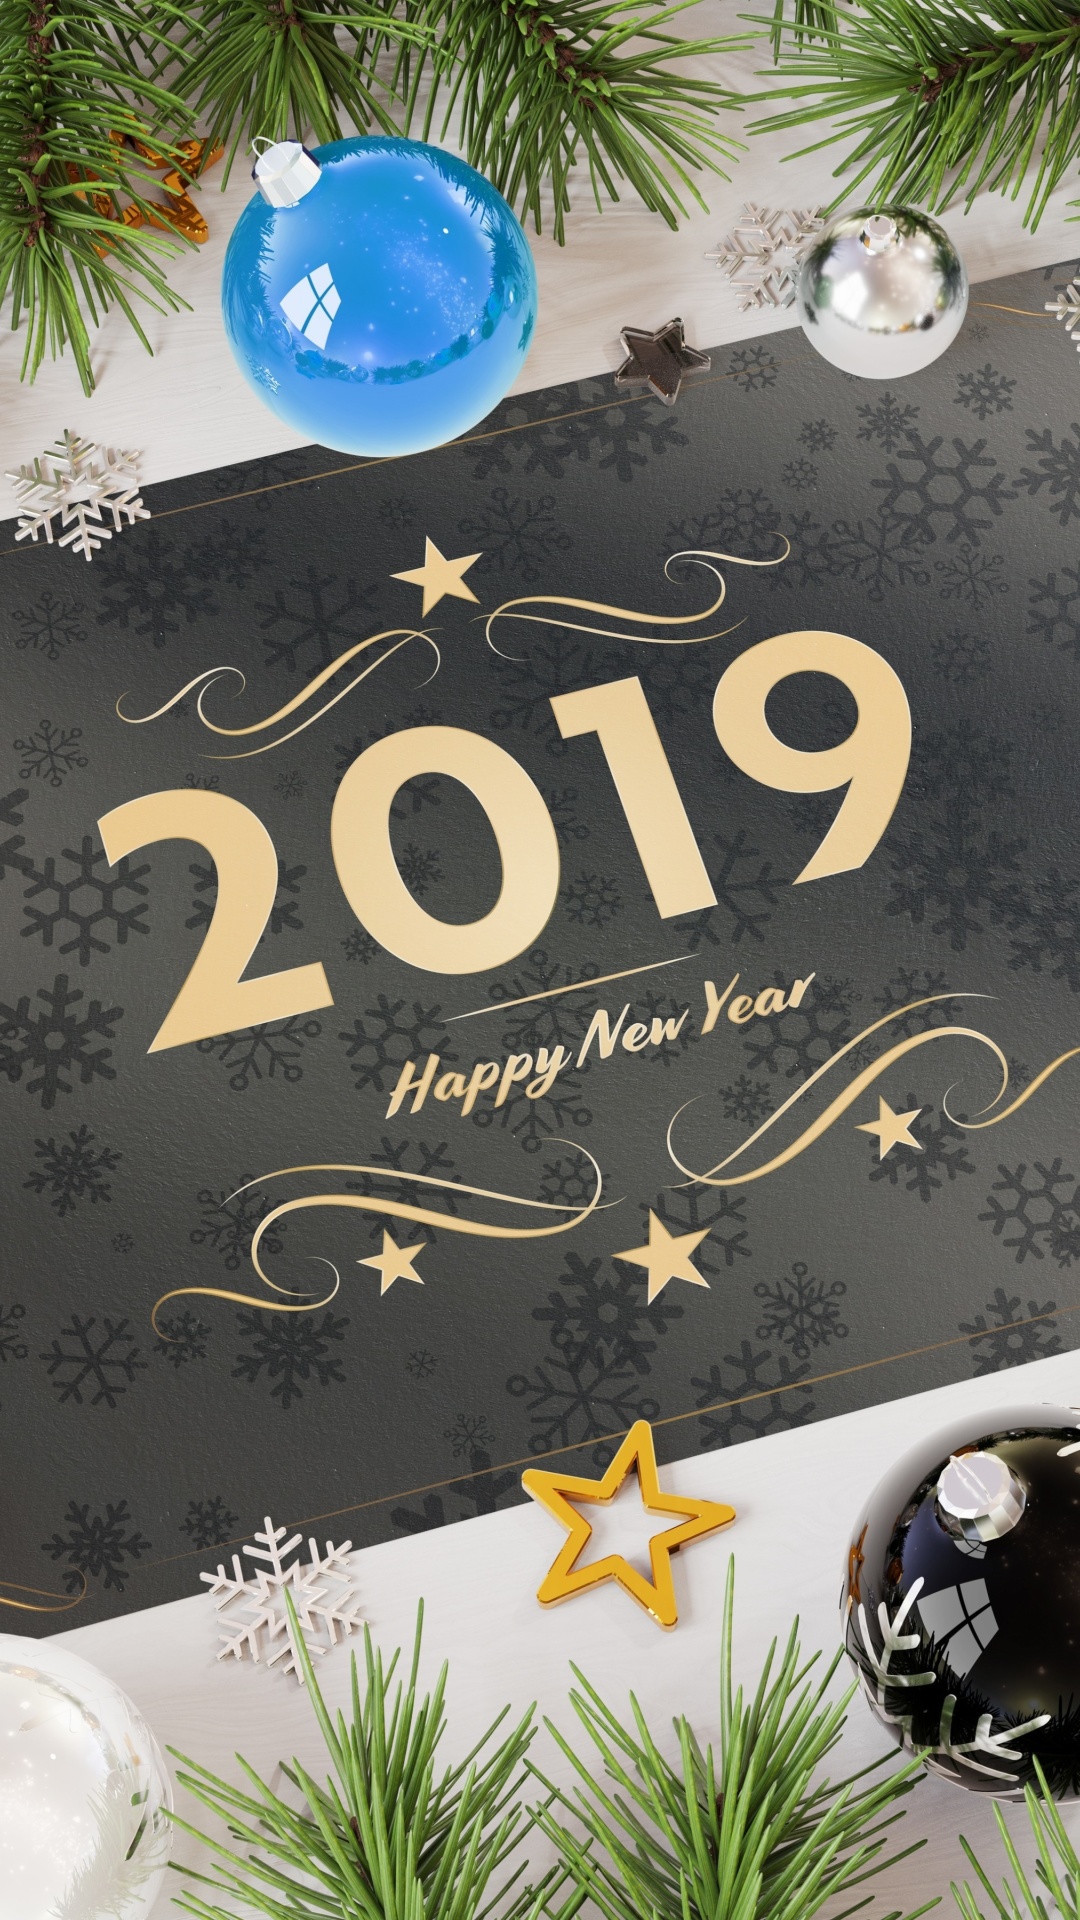 2019 Happy New Year Message wallpaper 1080x1920